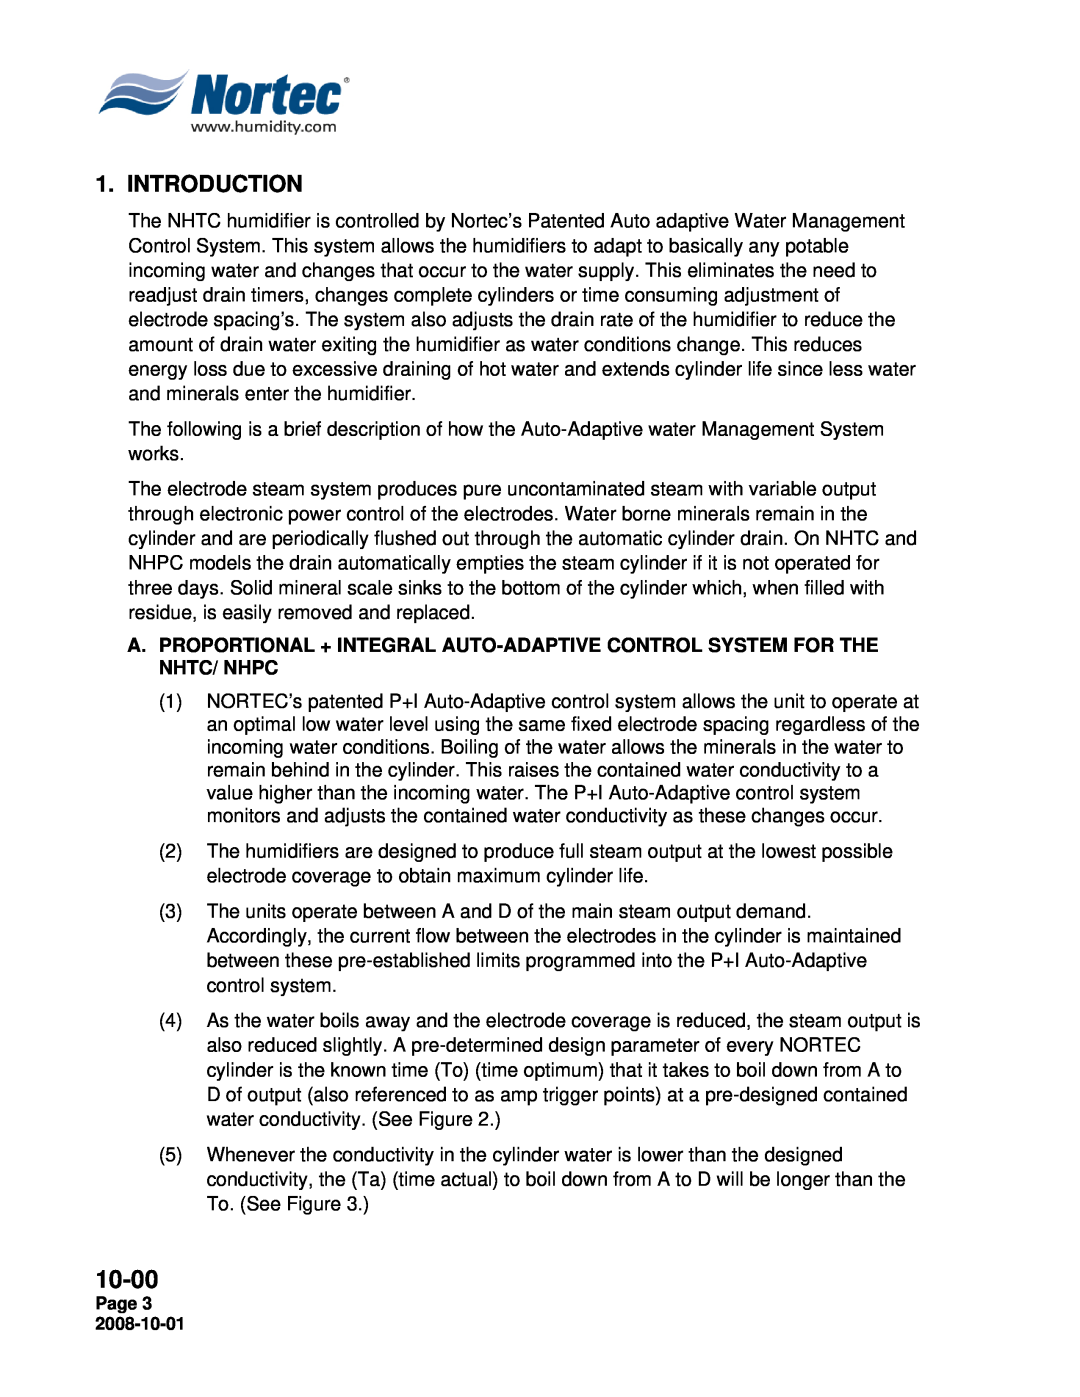 Nortec NHTC, NHPC manual Introduction, 10-00, Page 3 